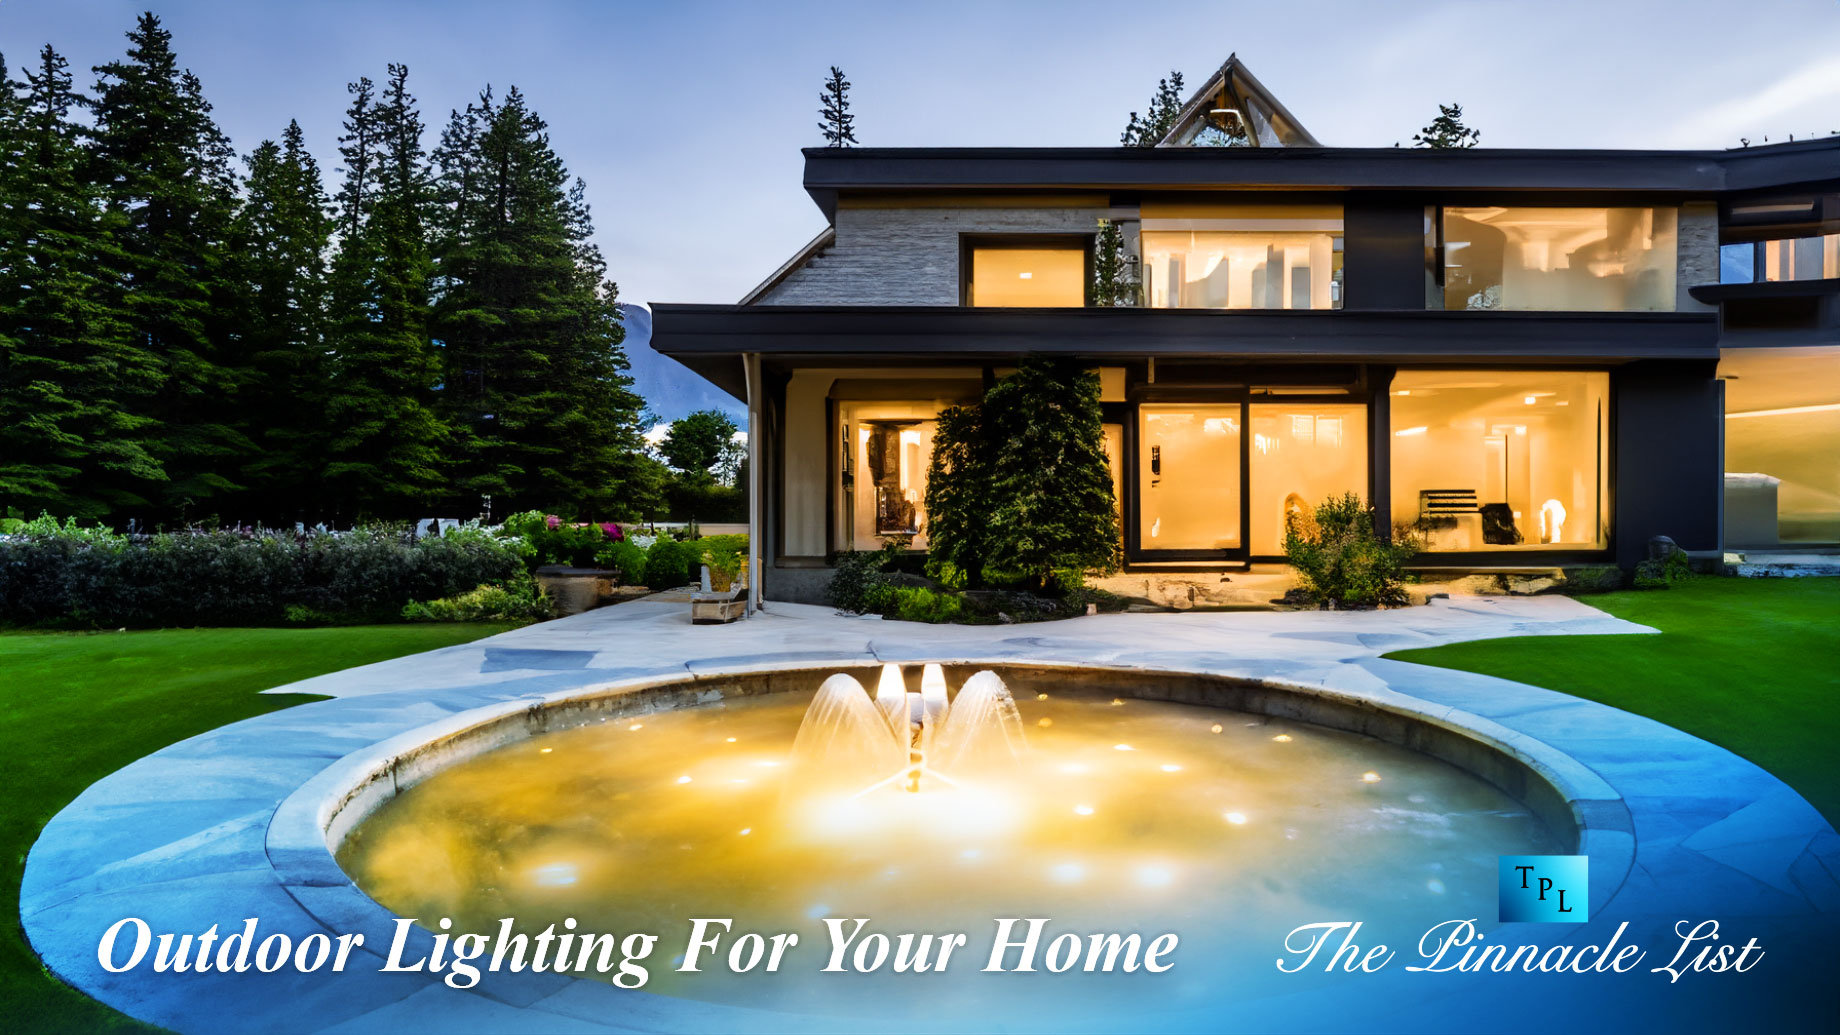 Outdoor Lighting For Your Home